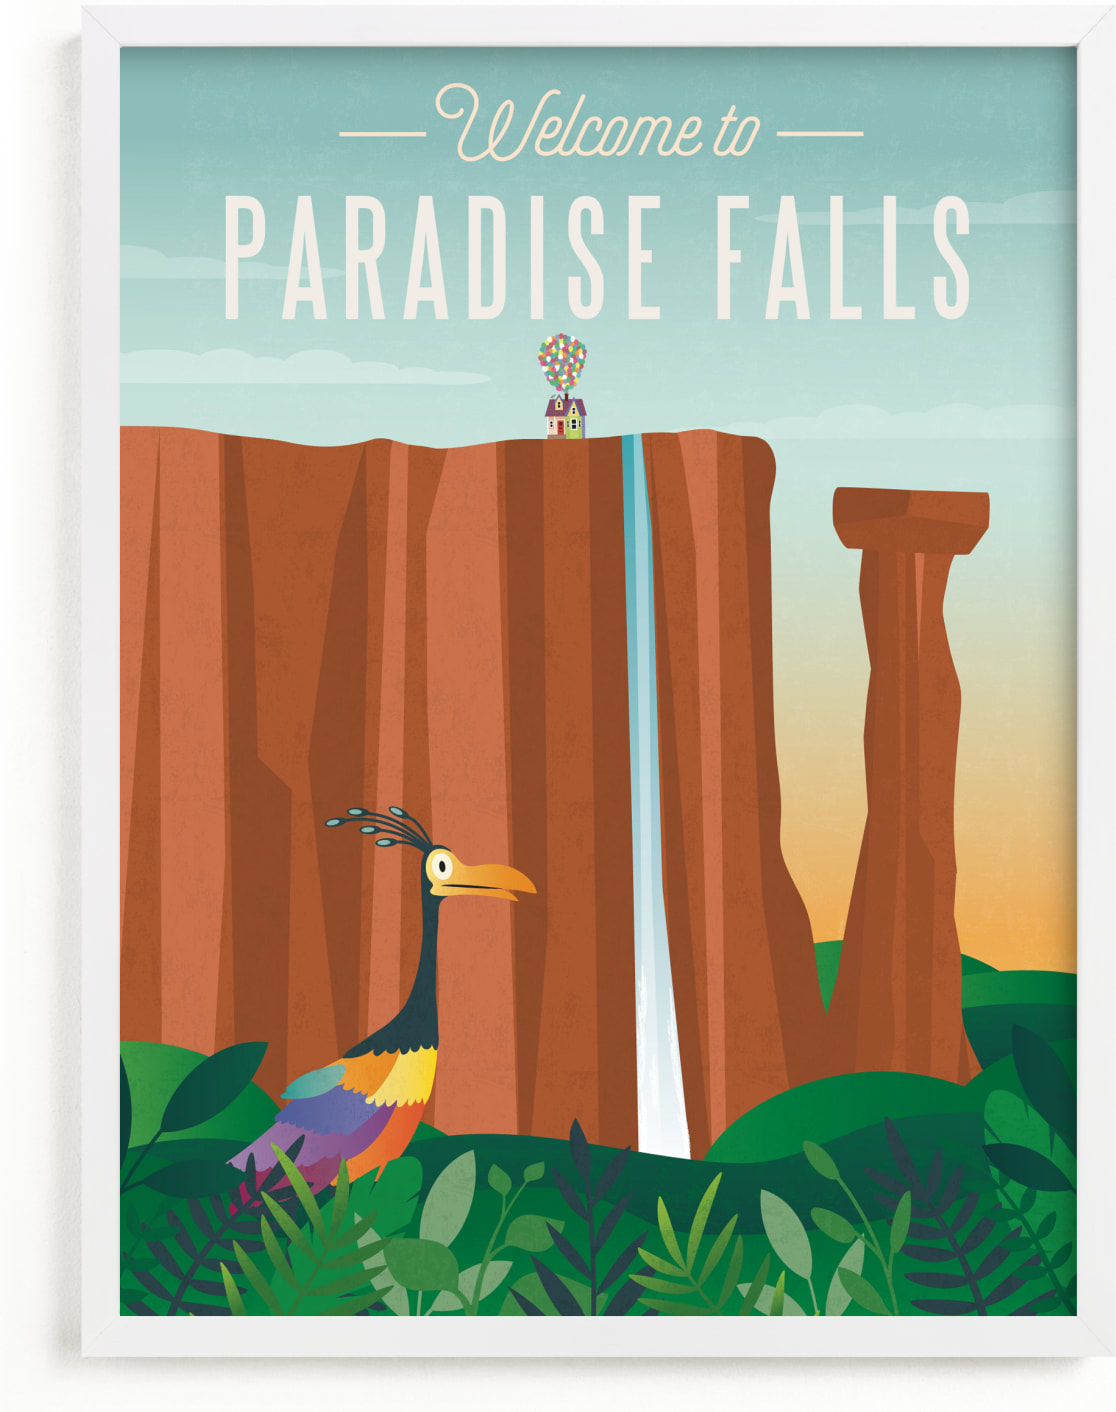 This is a blue disney art by Erica Krystek called Welcome to Disney and Pixar's Paradise Falls.